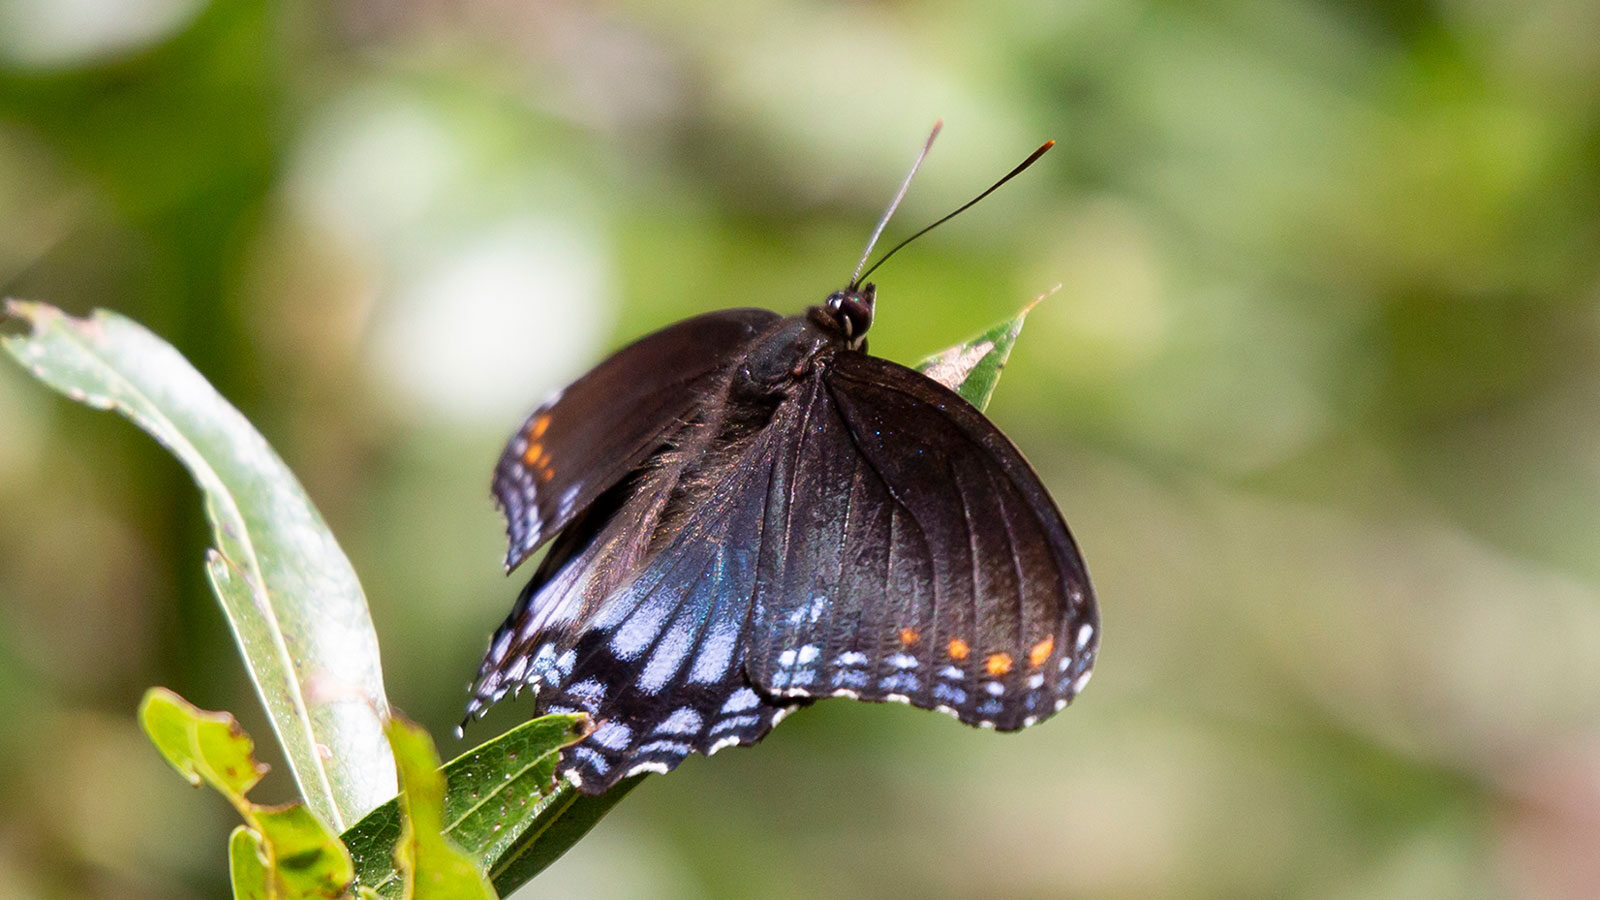 Red-spotted purple butterfly on a green leaf